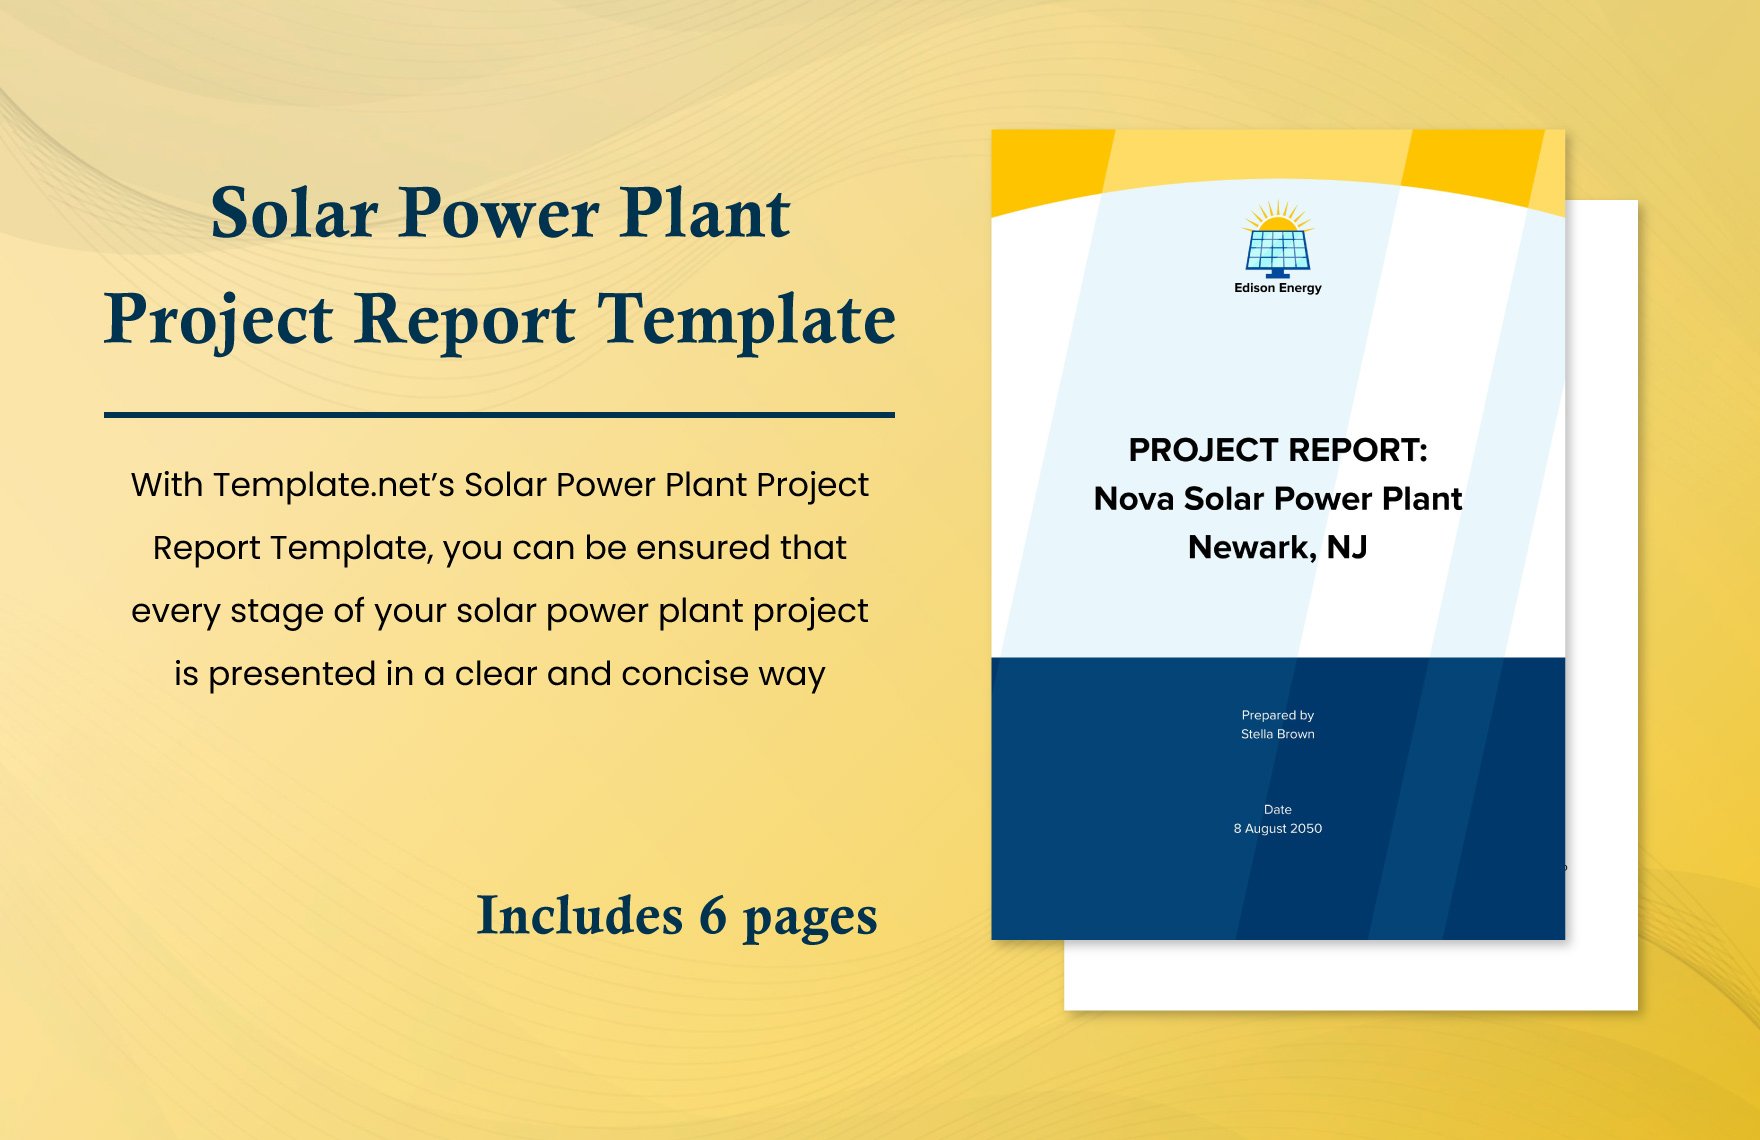 Solar Power Plant Project Report Template